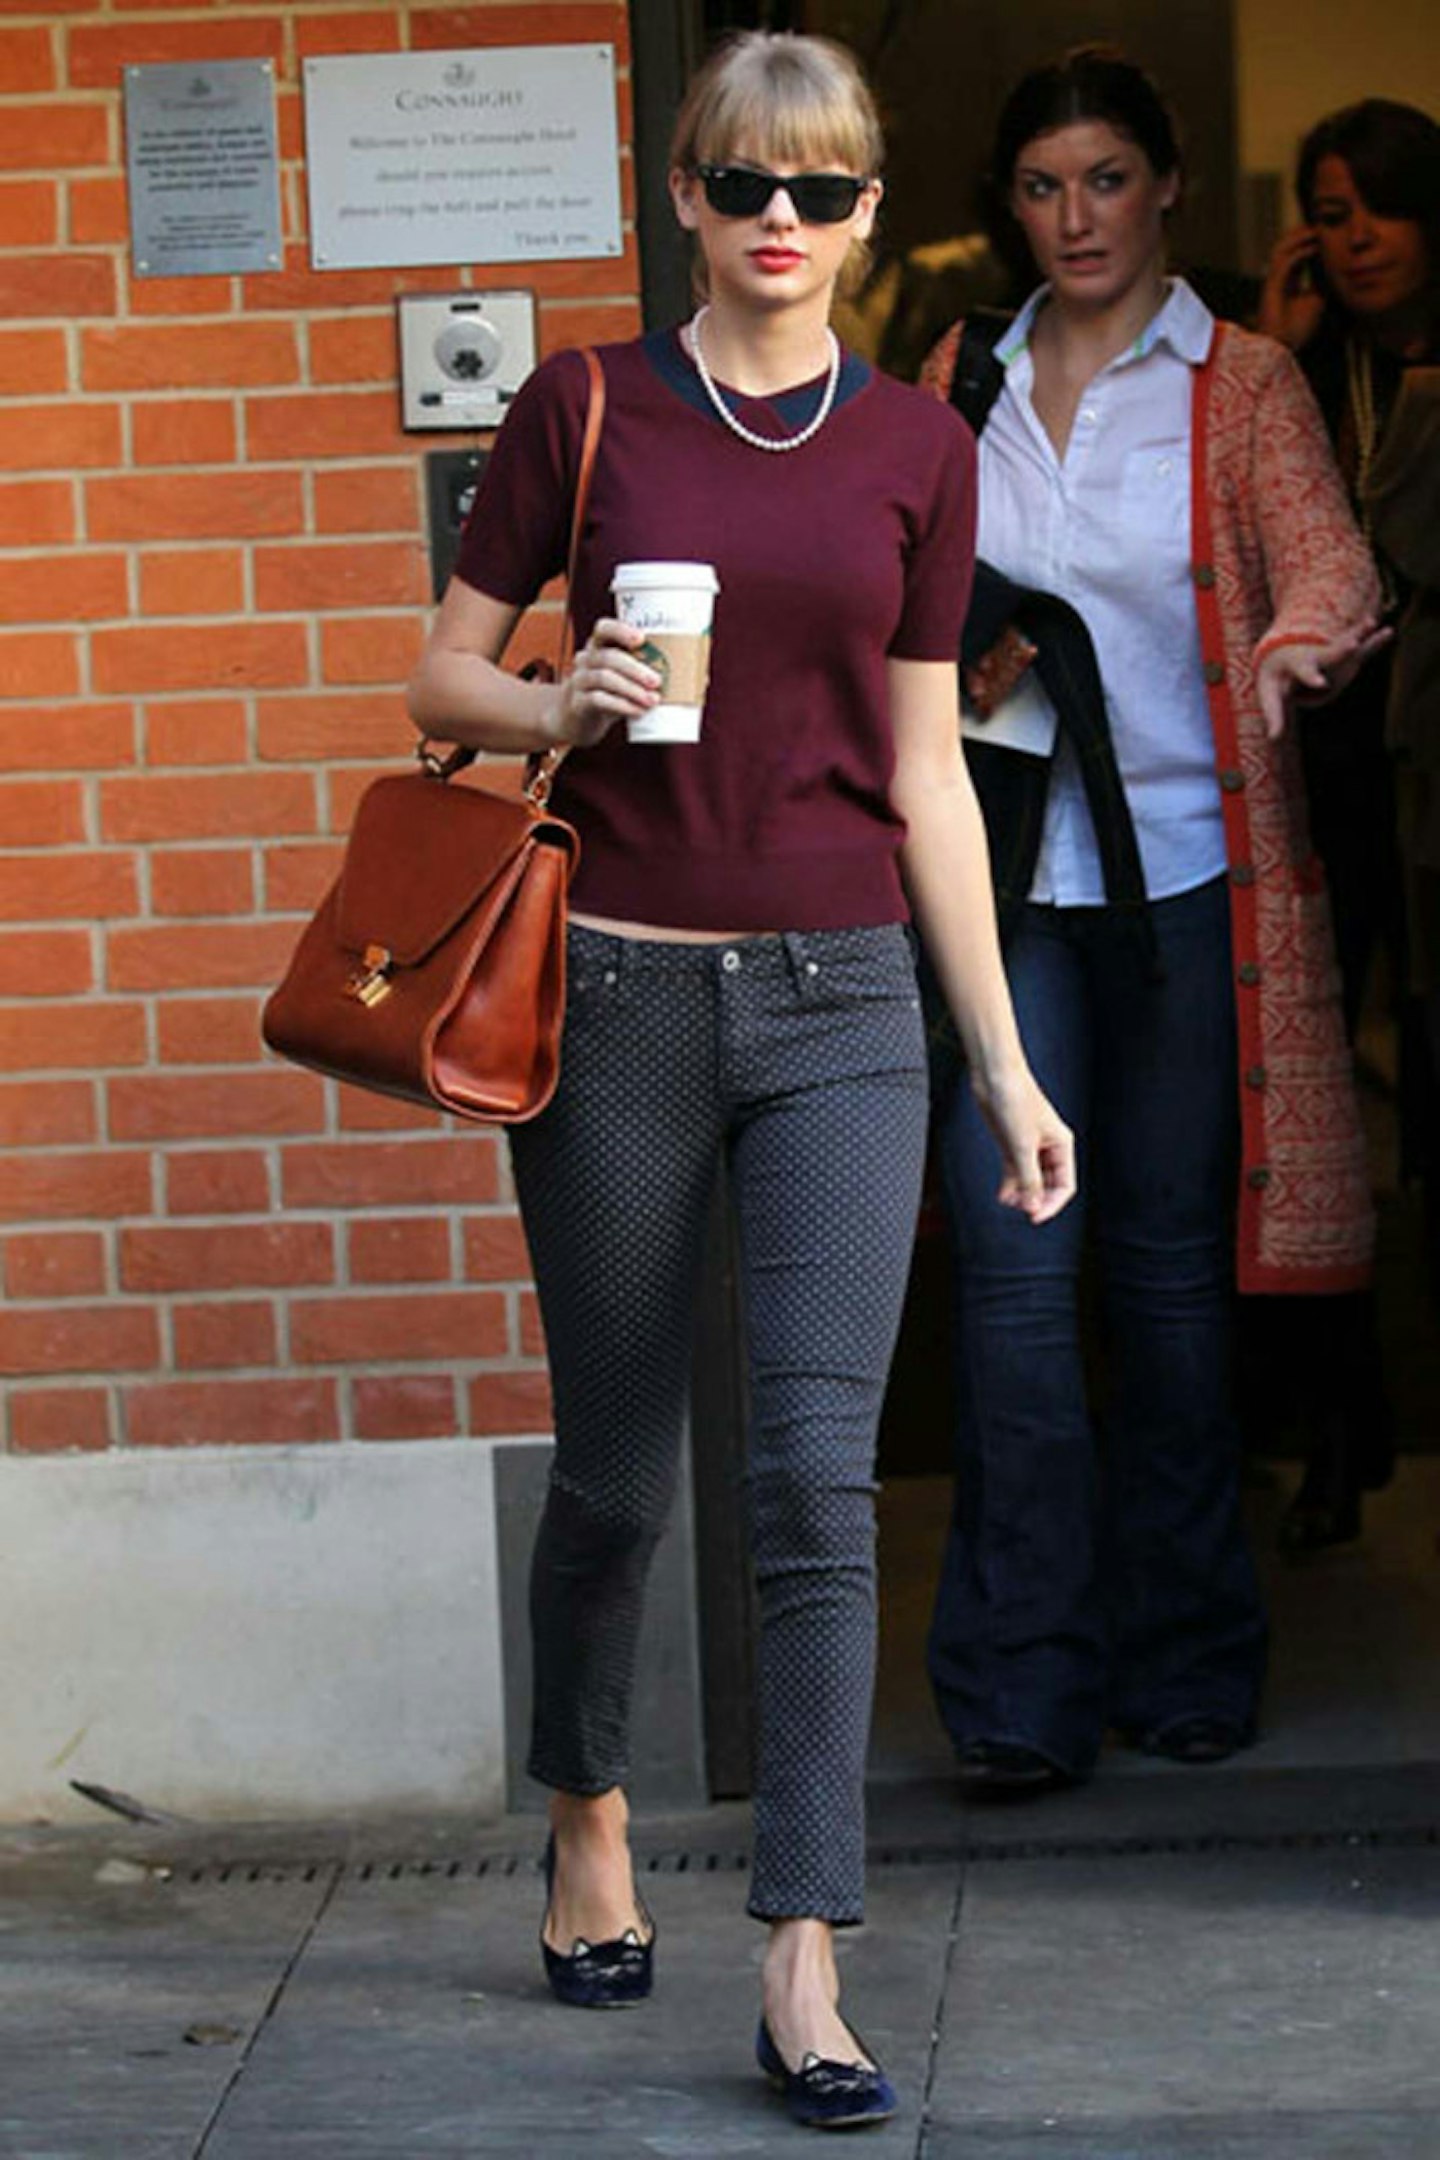 4- Taylor Swift leaving her hotel in Londo - 4 October 2012